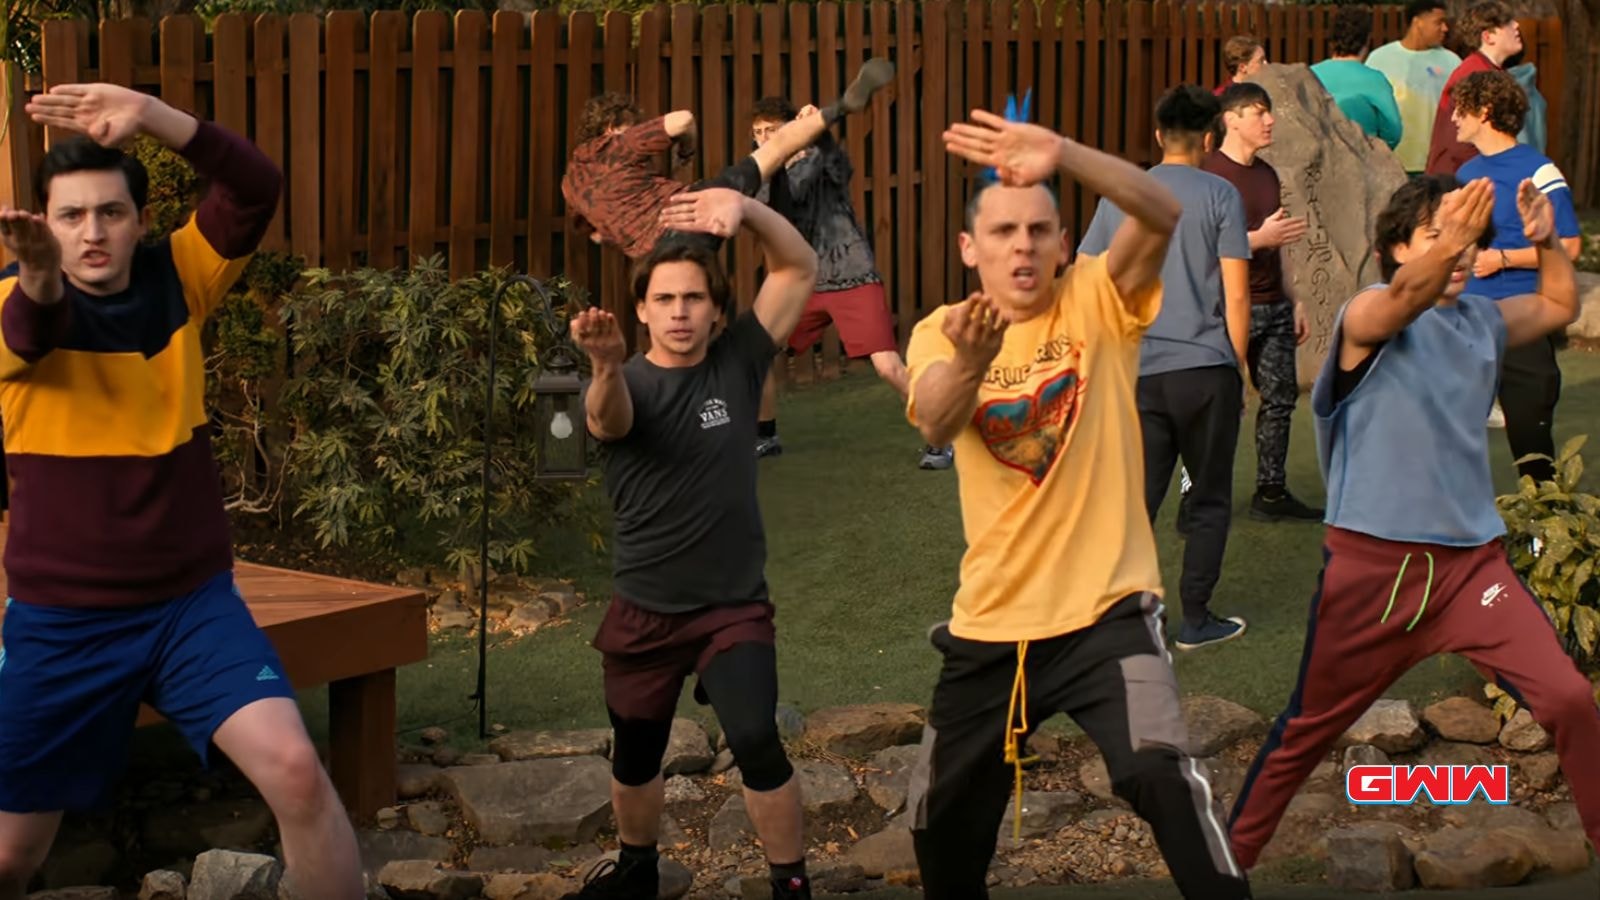 Group of karate students practicing martial arts moves in a yard.